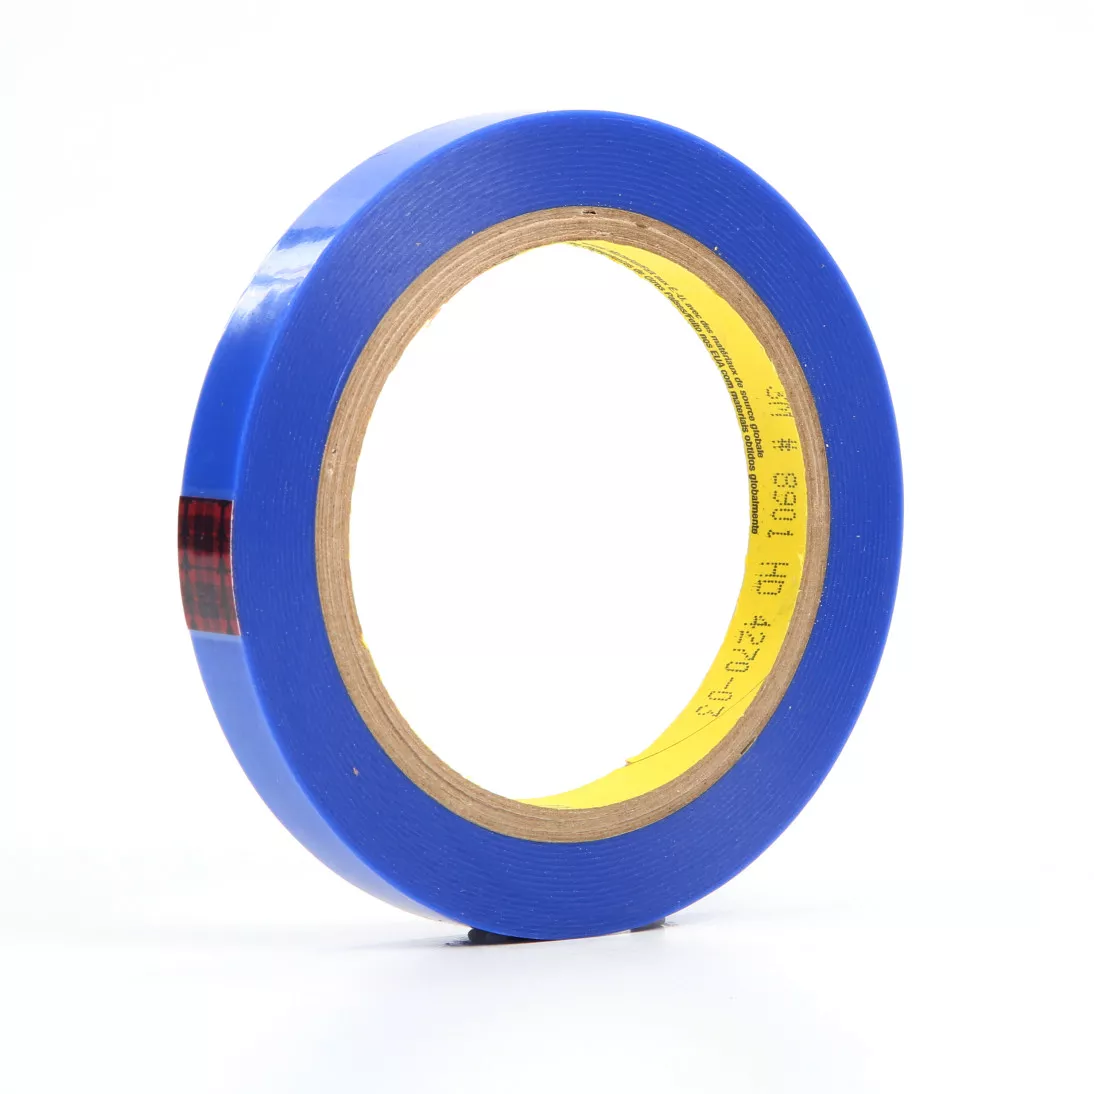 3M™ Polyester Tape 8901, Blue, 1/2 in x 72 yd, 0.9 mil, 72 rolls per
case